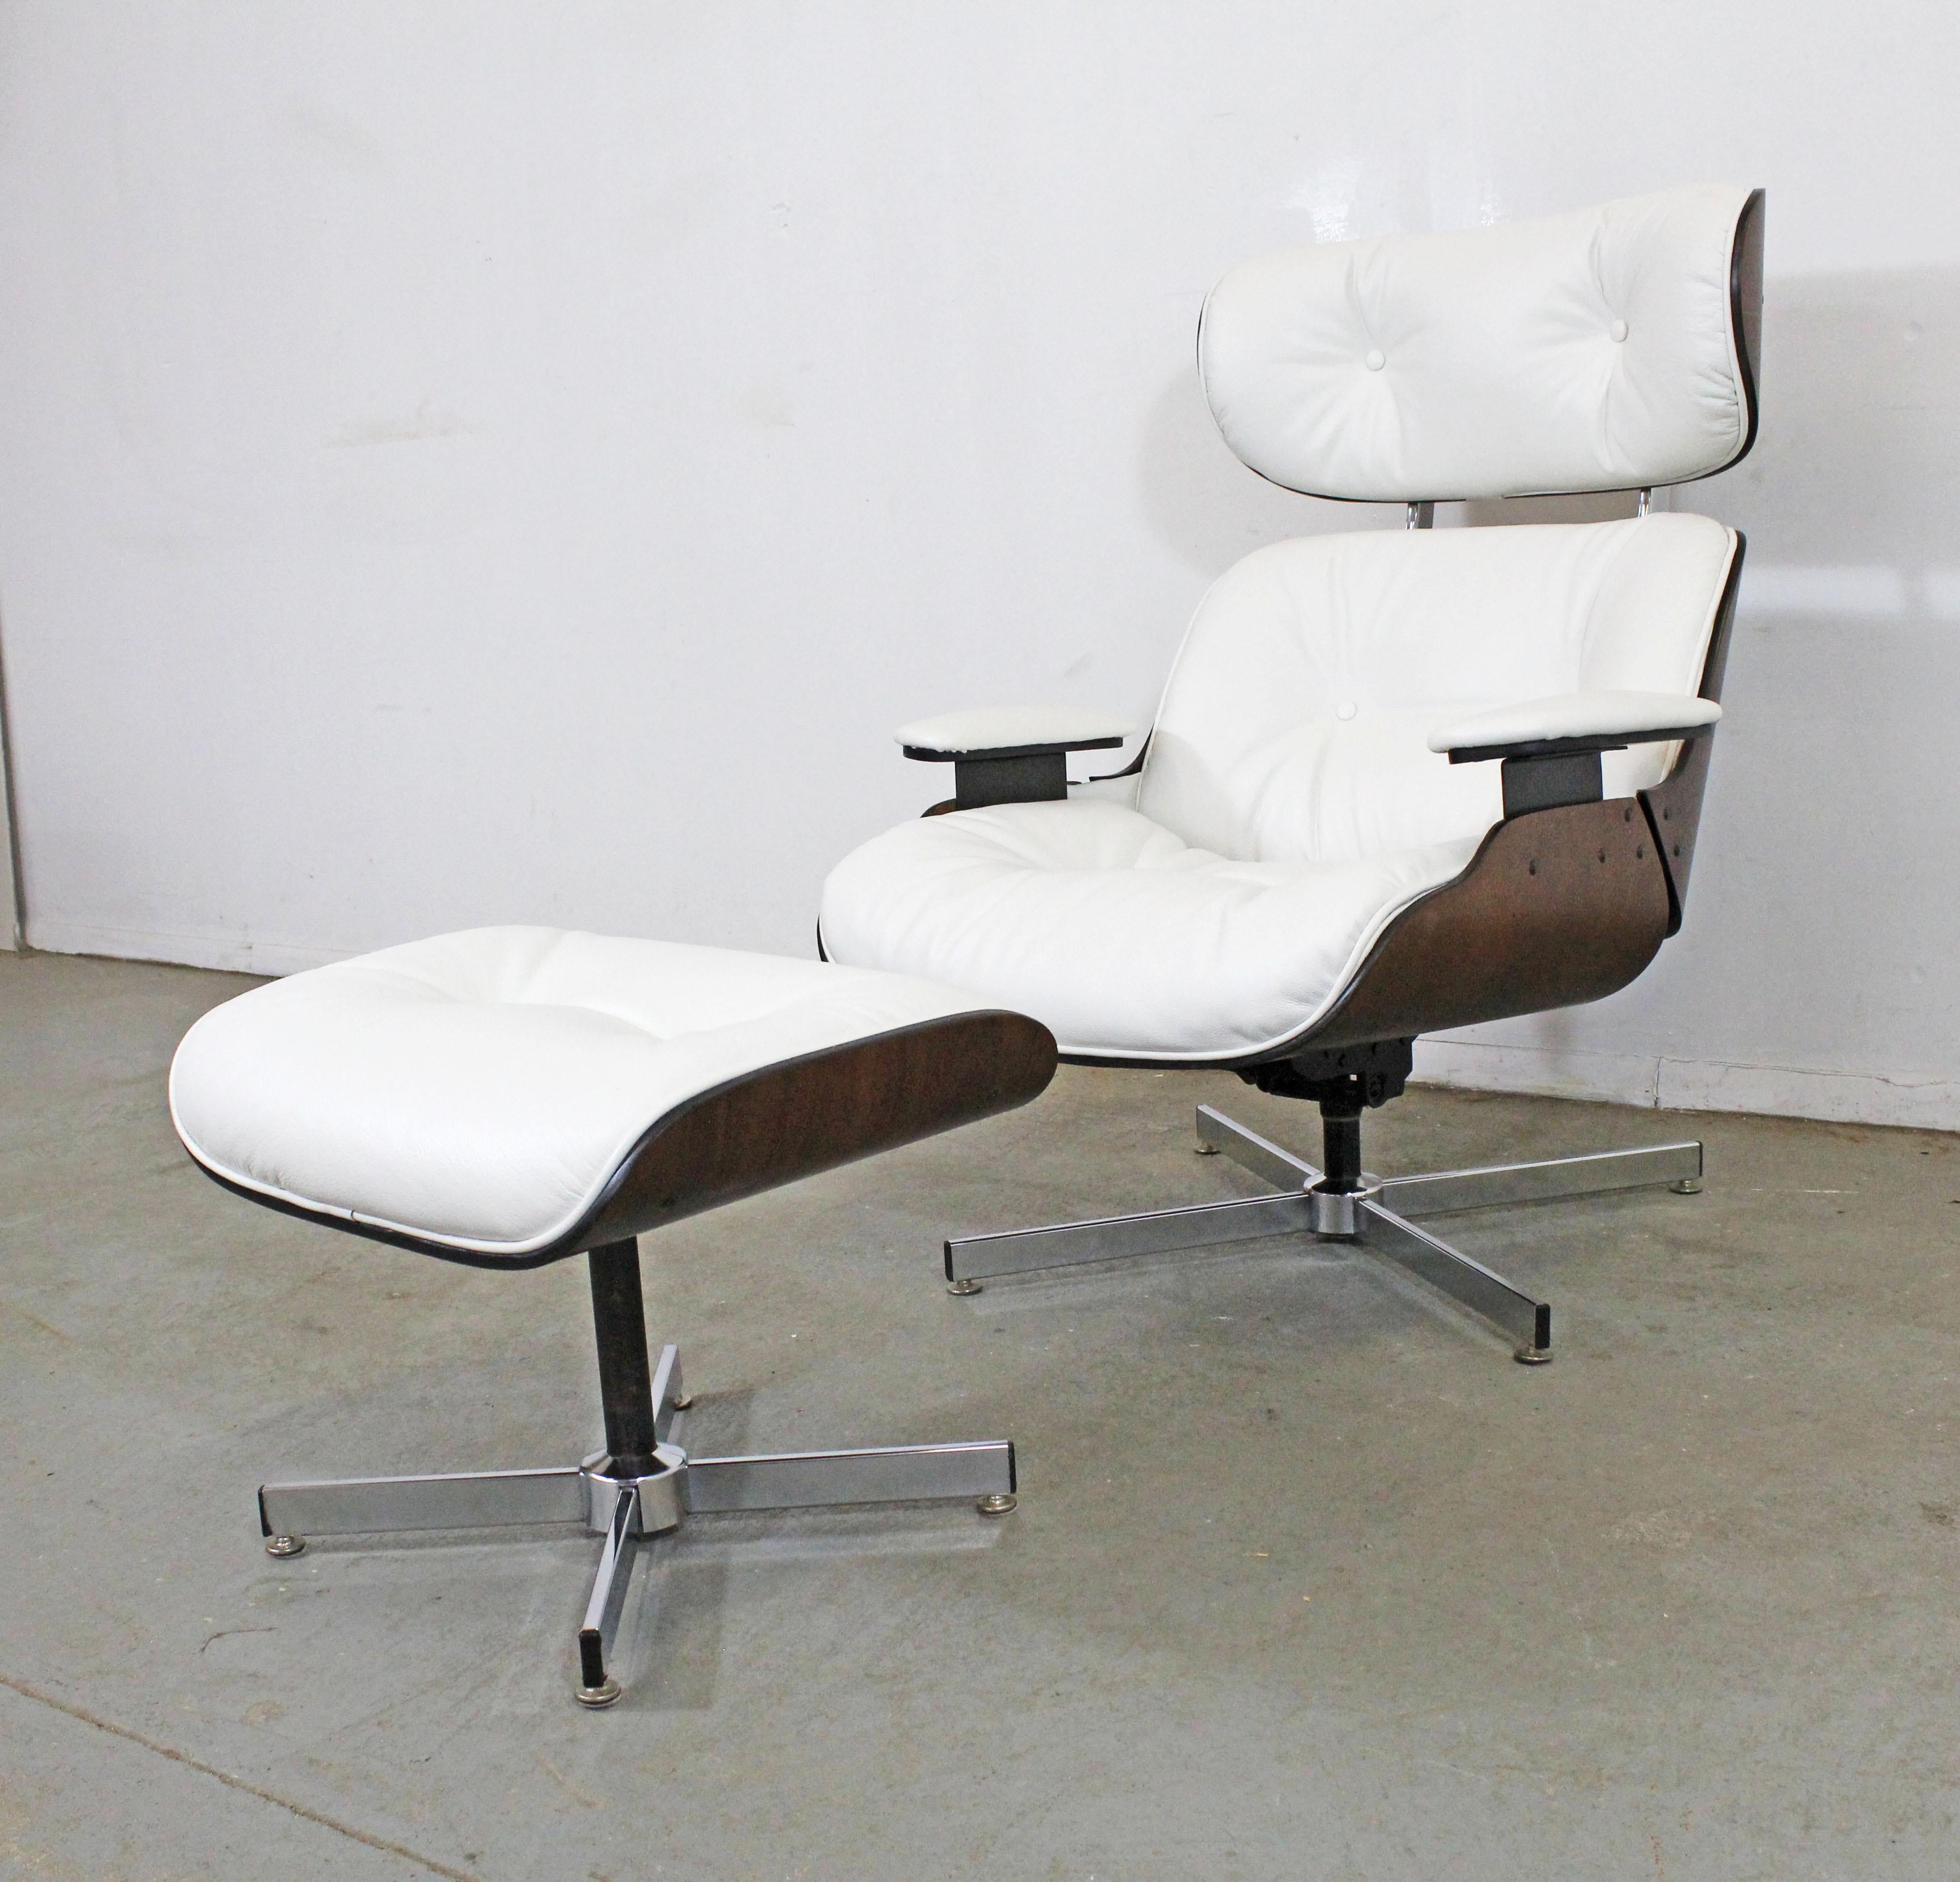 Offered is a beautifully restored Selig lounge chair and ottoman that swivels. This set has been reupholstered in 